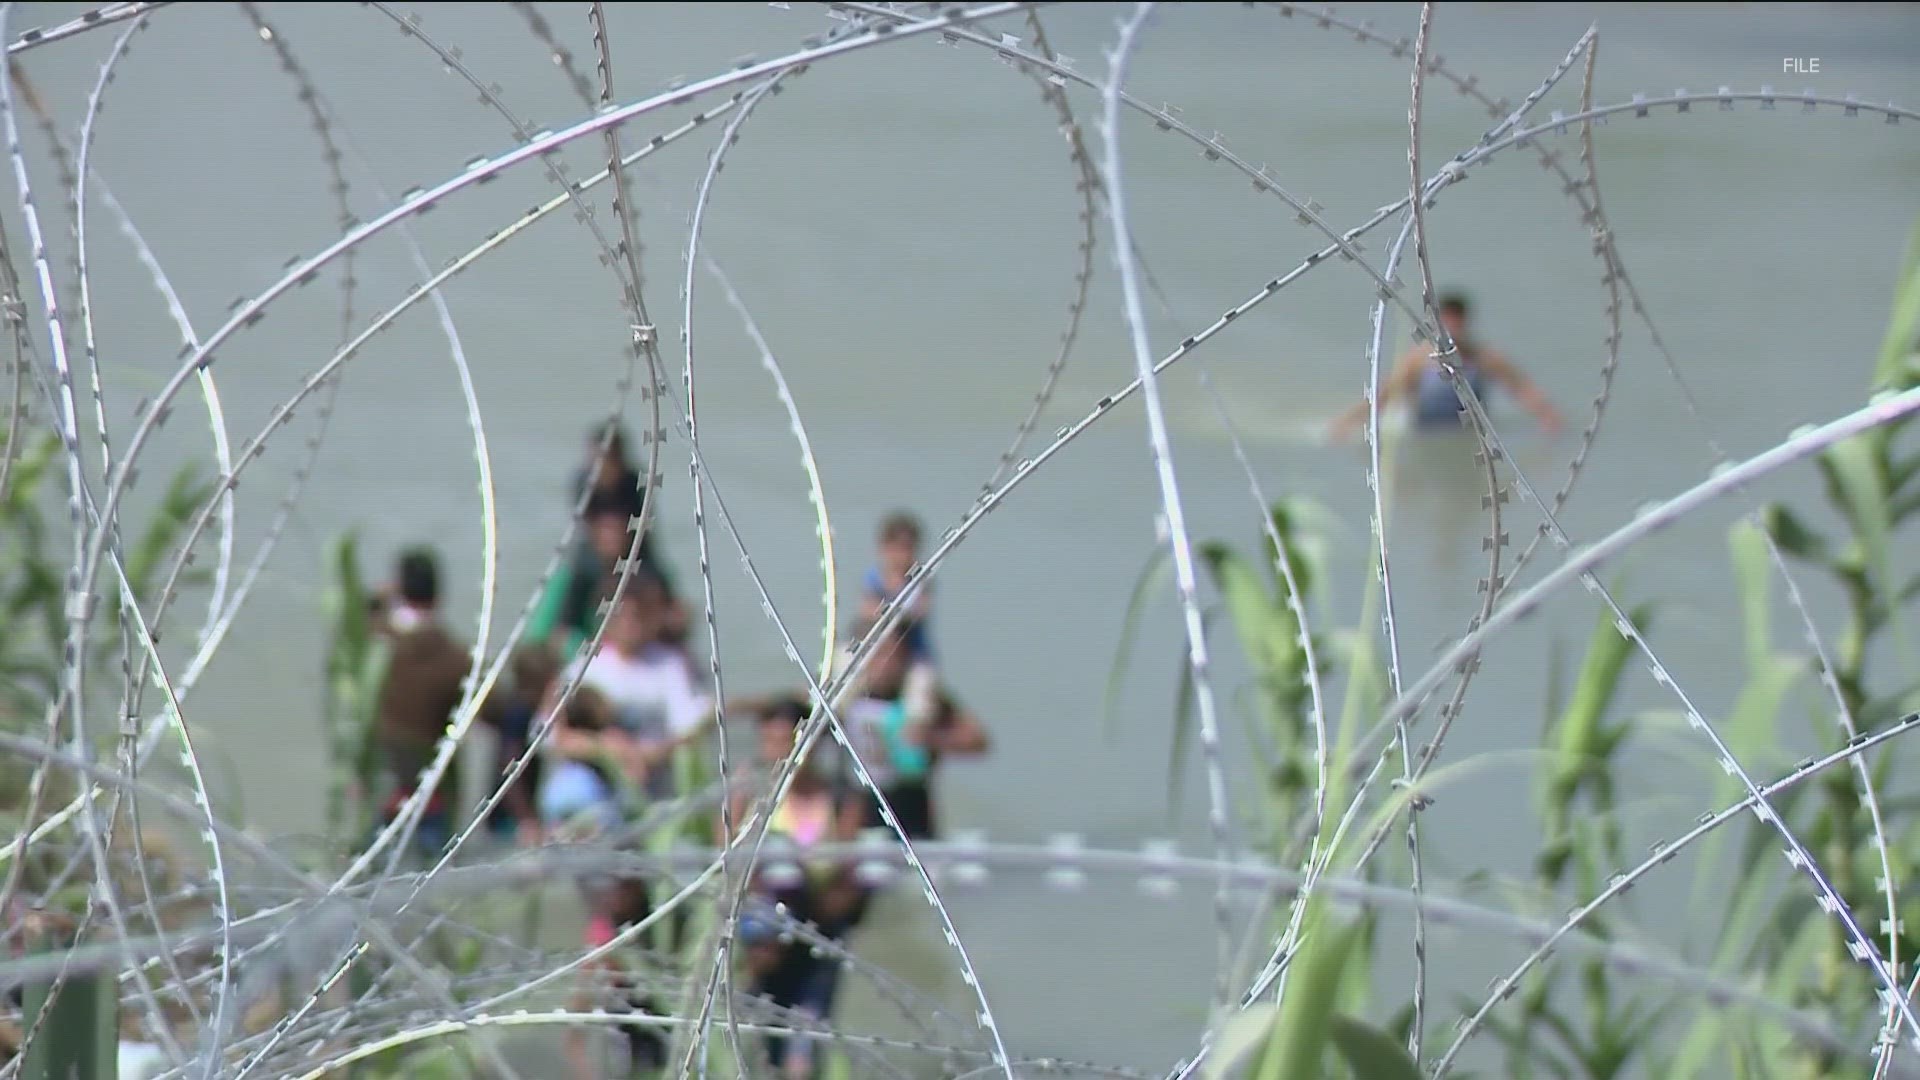 Texas Attorney General Ken Paxton is asking a court to speed up a case over razor wire installed along the border.